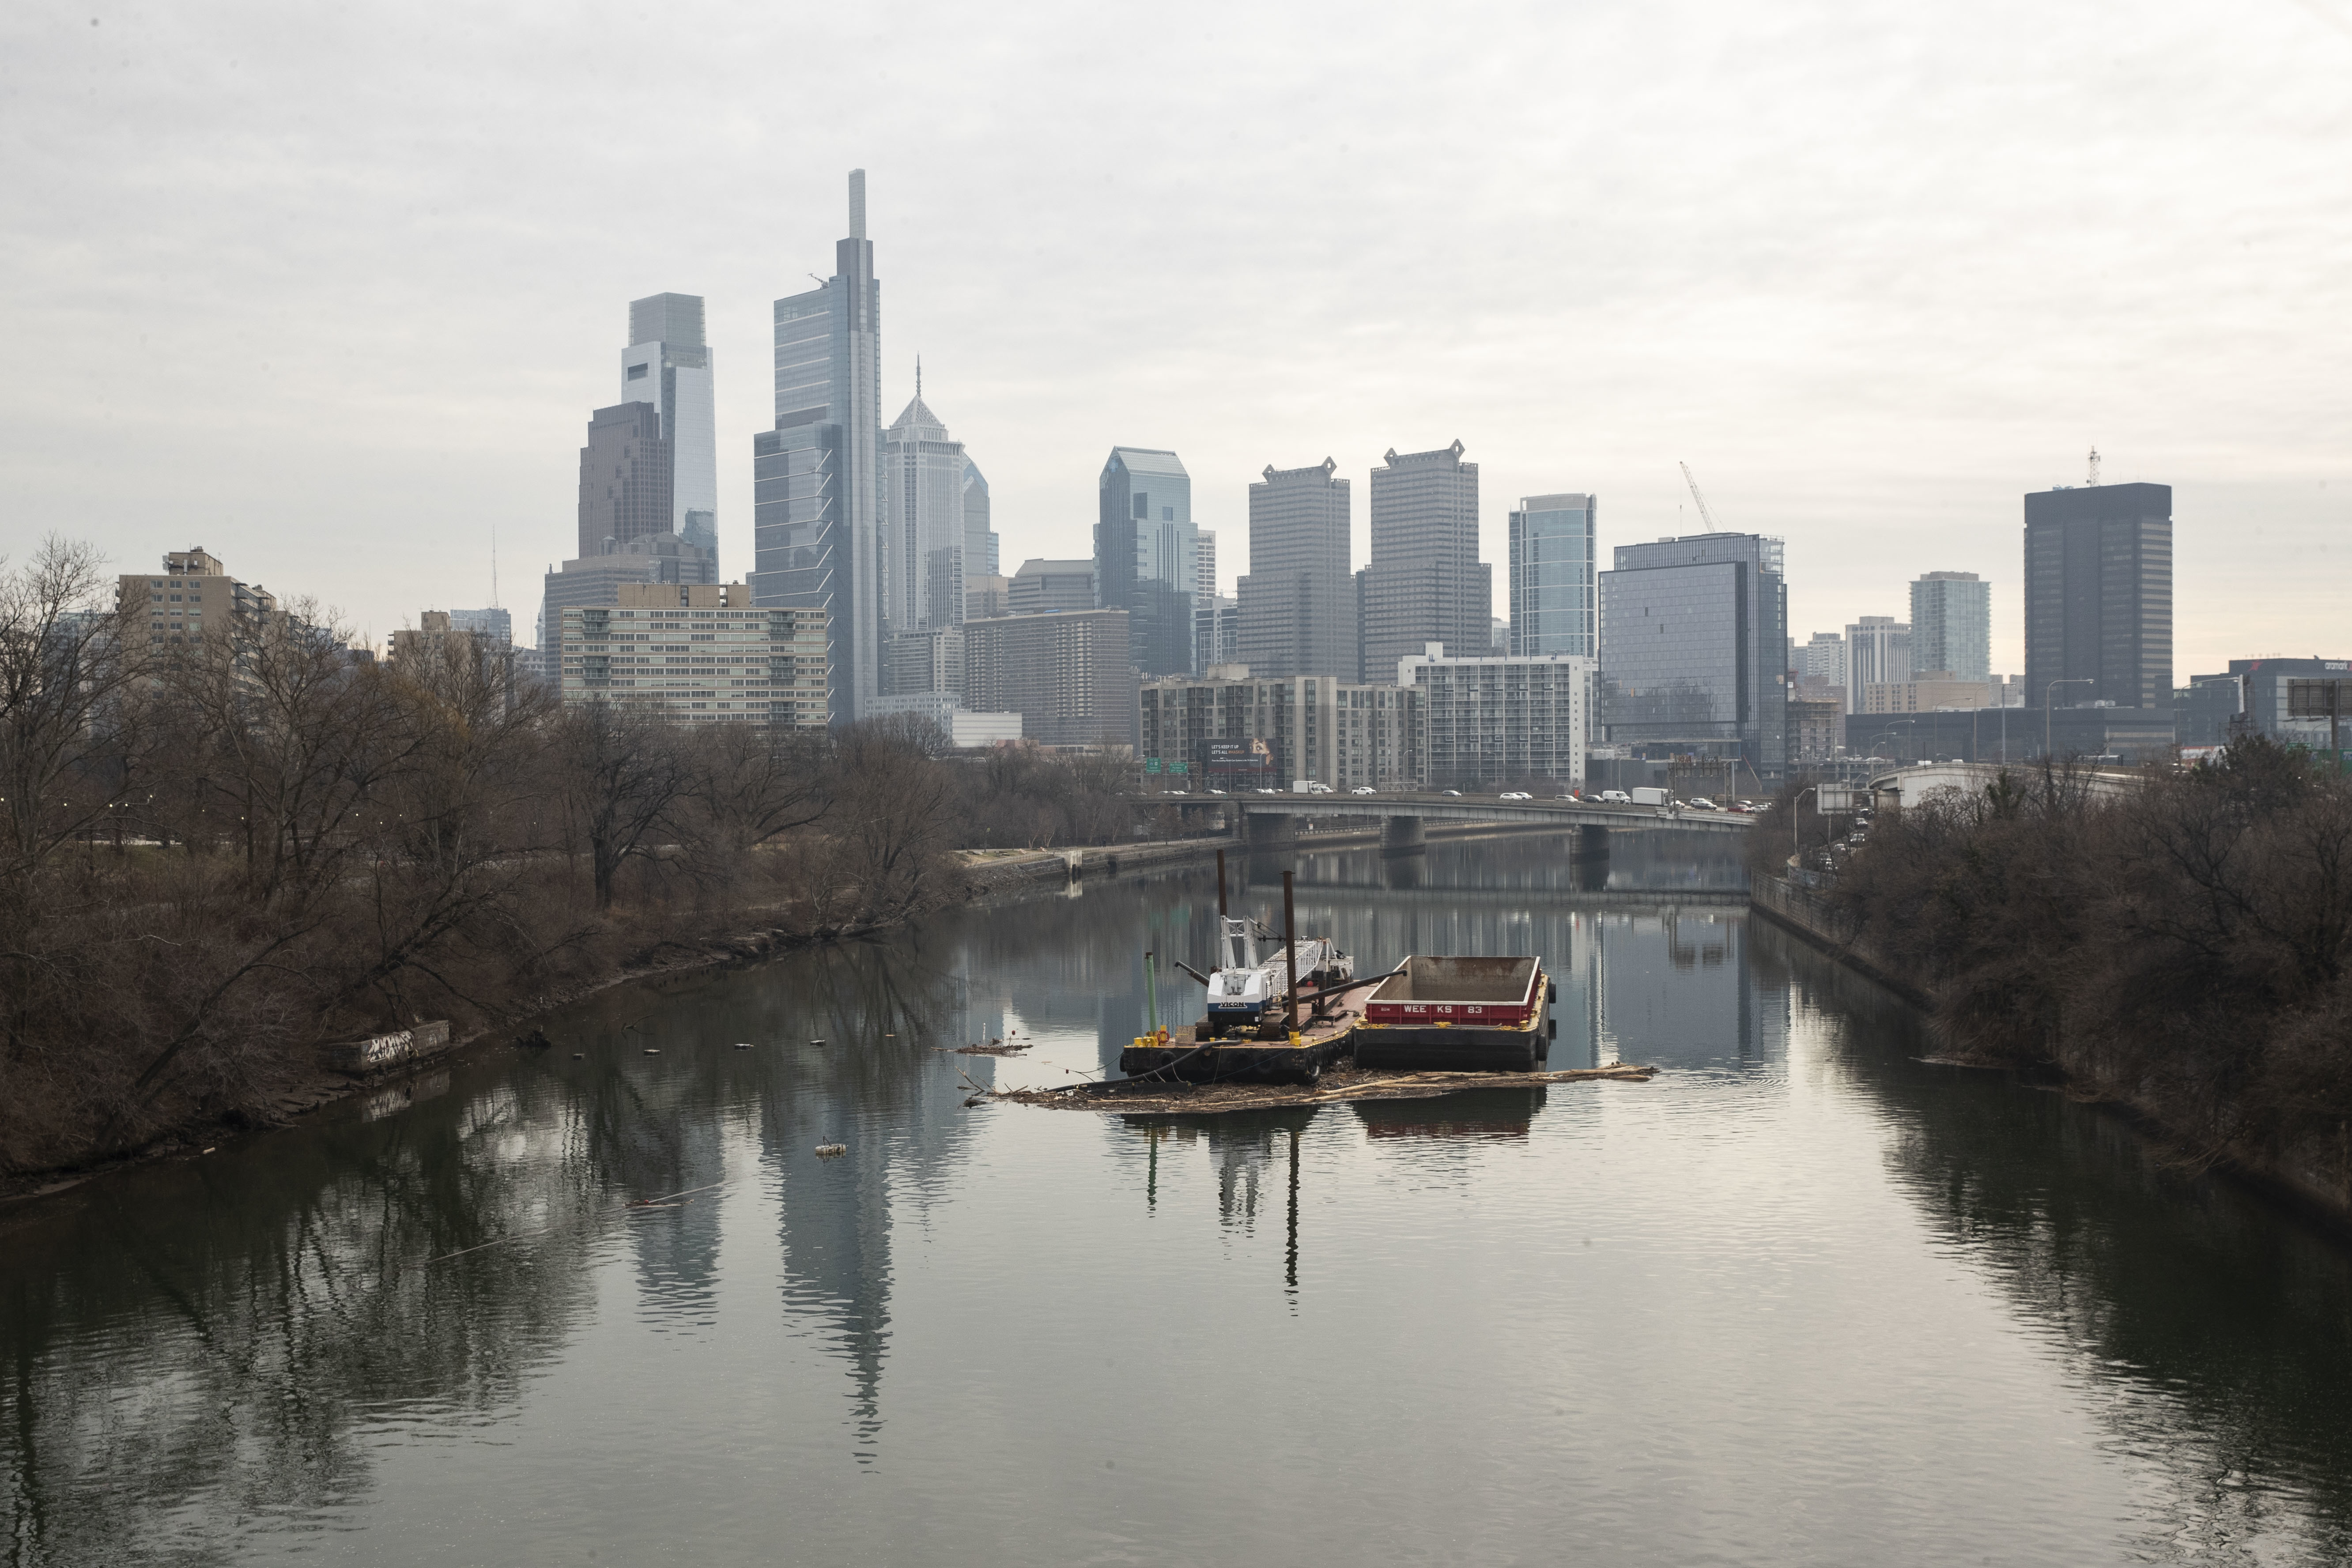 Dredge the Schuylkill, or risk the lights on Boathouse Row going